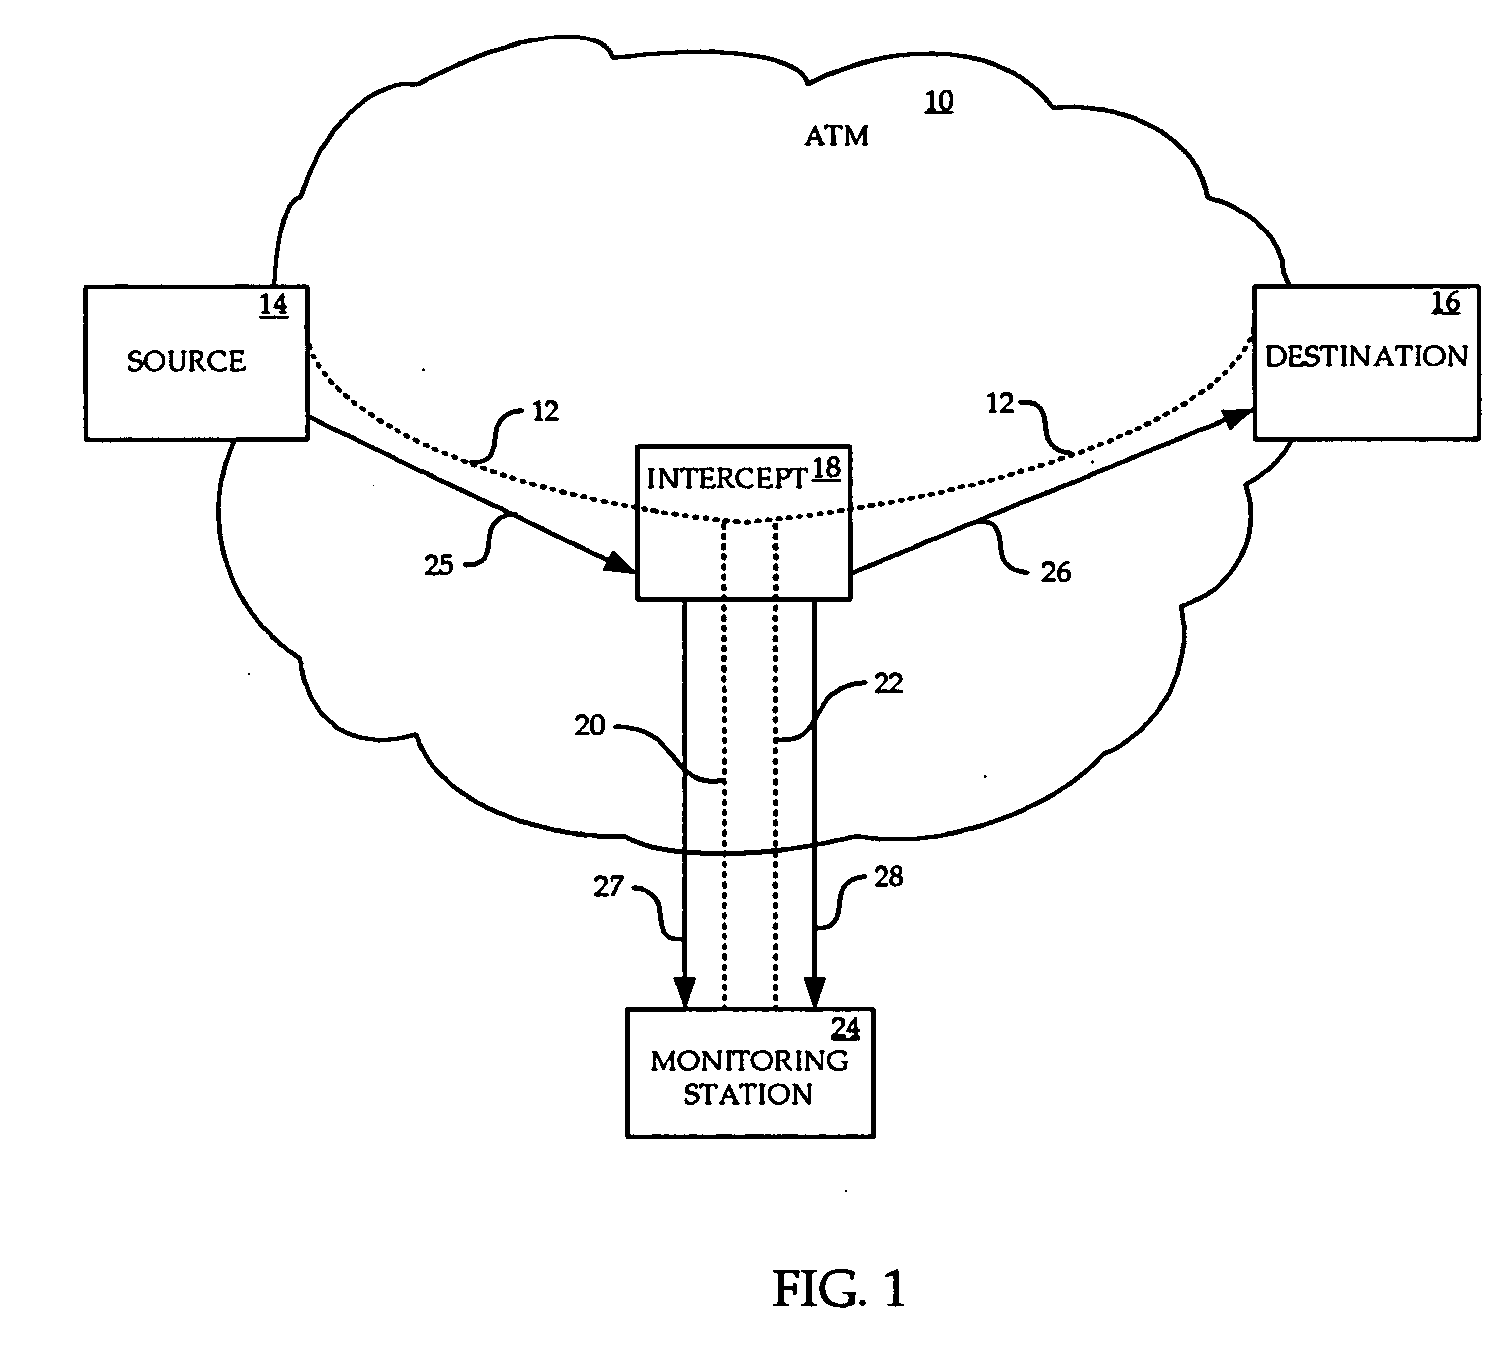 Lawful intercept of traffic connections